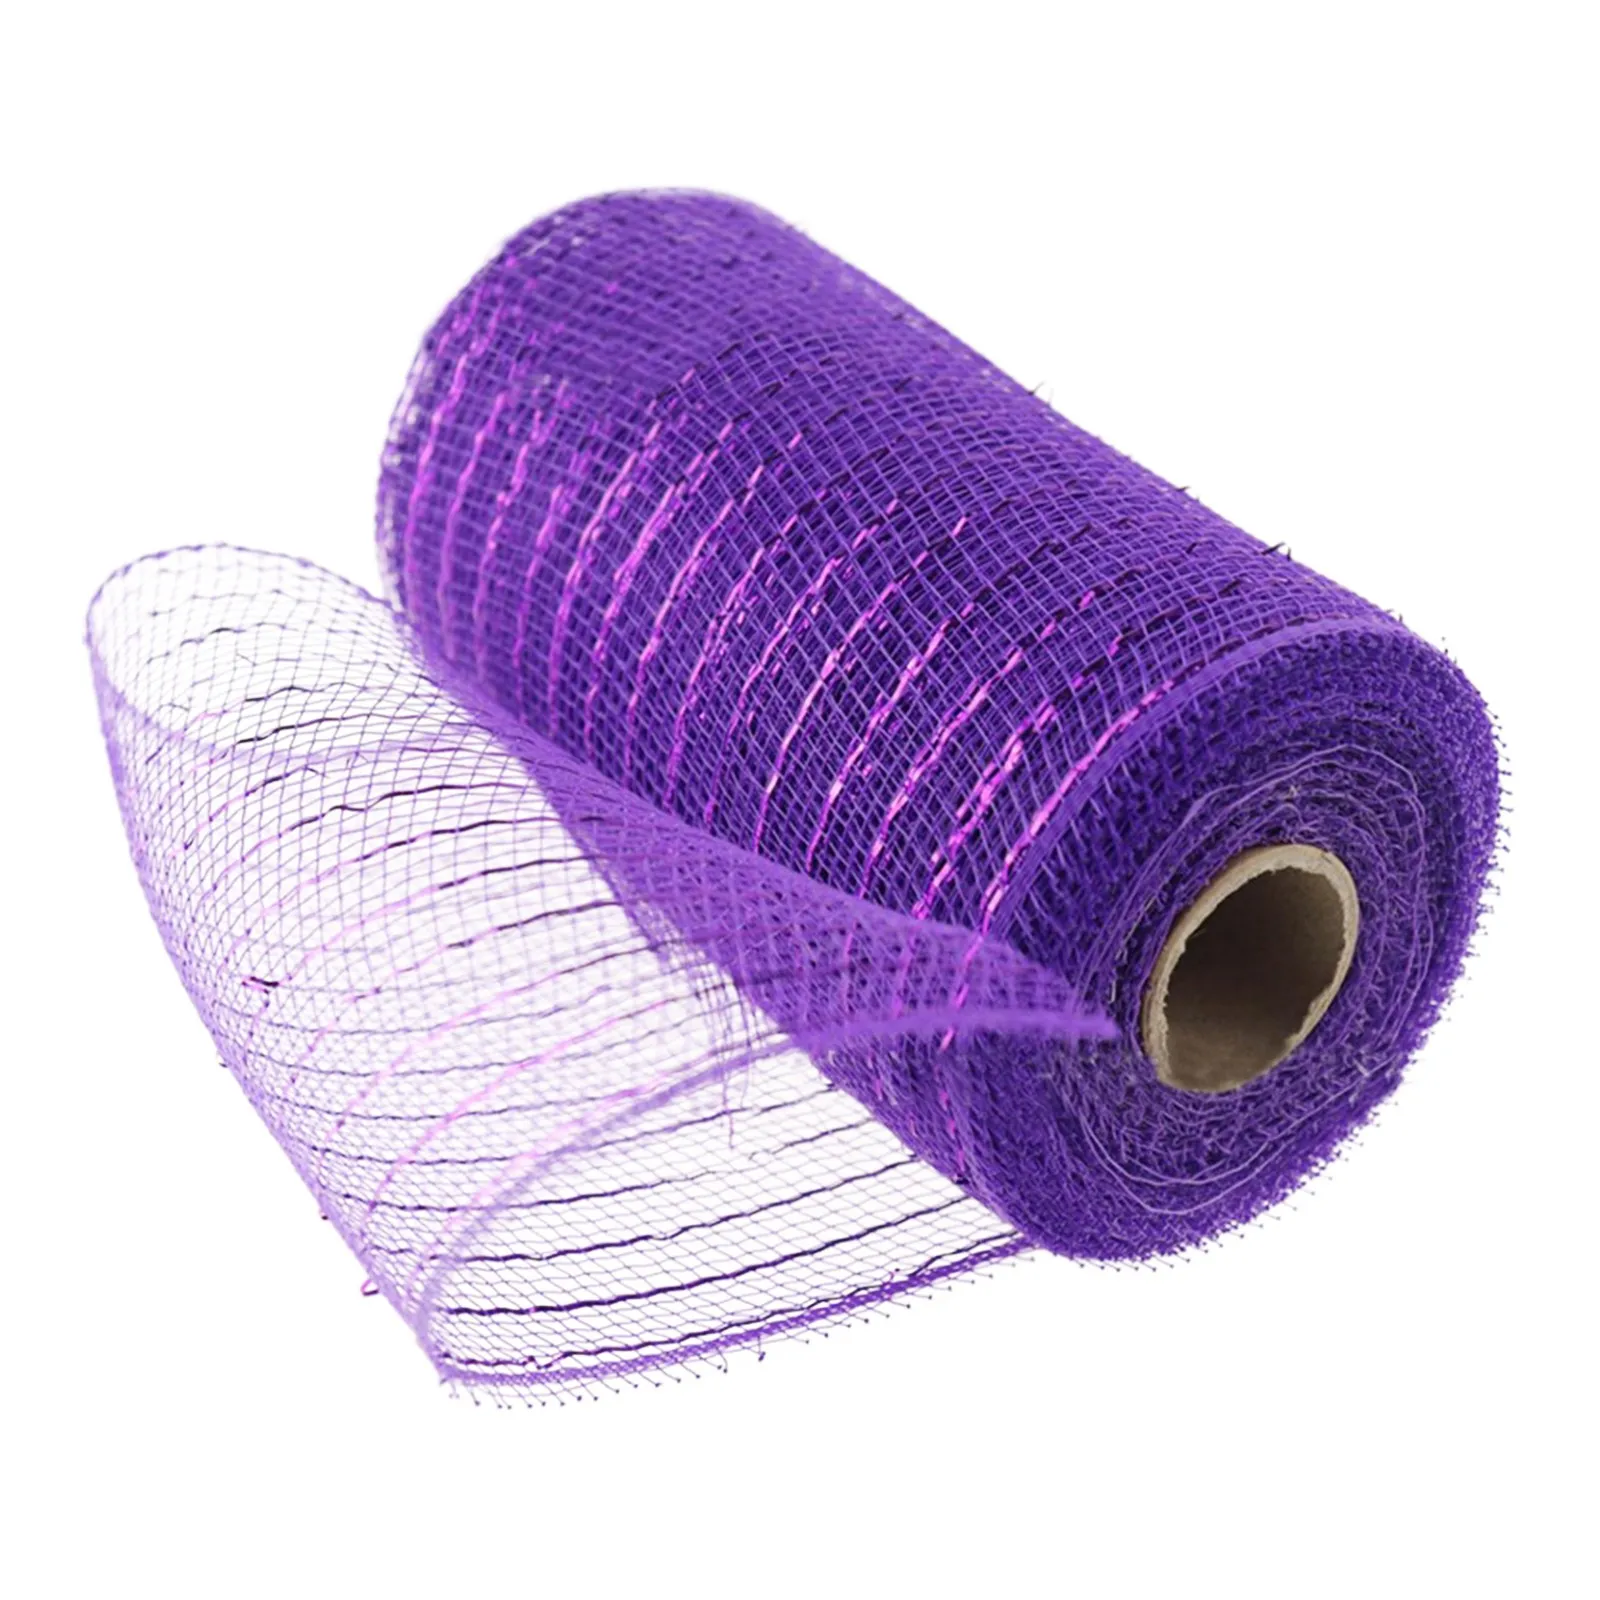 4 Rolls Deco Poly Mesh Ribbons 30 Feet Each Roll Metallic Foil Mesh Ribbon for Home Door Wreath Decoration DIY Crafts Making Supplies (Gray + Purple +